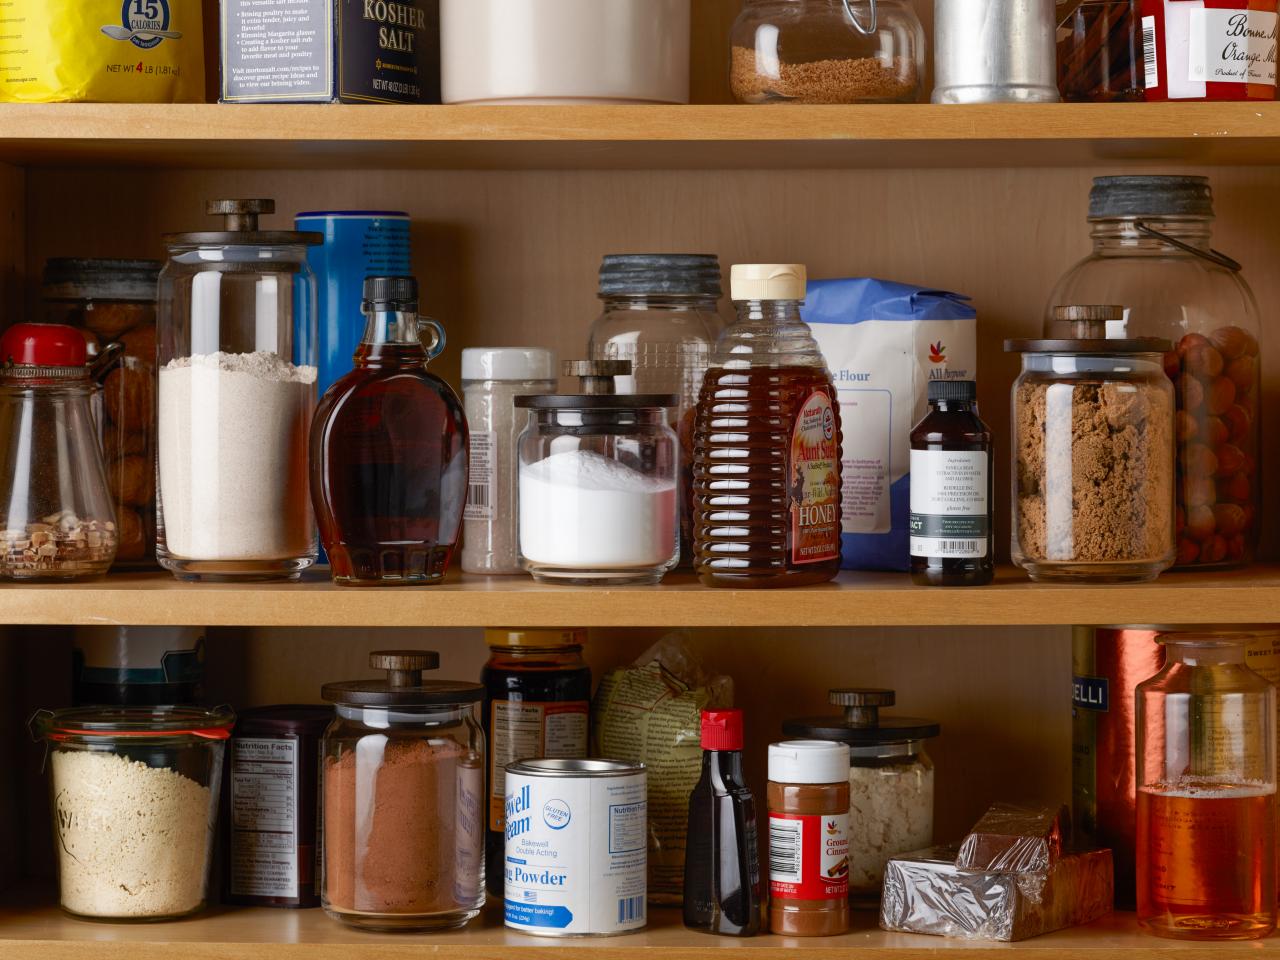 How to Store Common Baking Ingredients